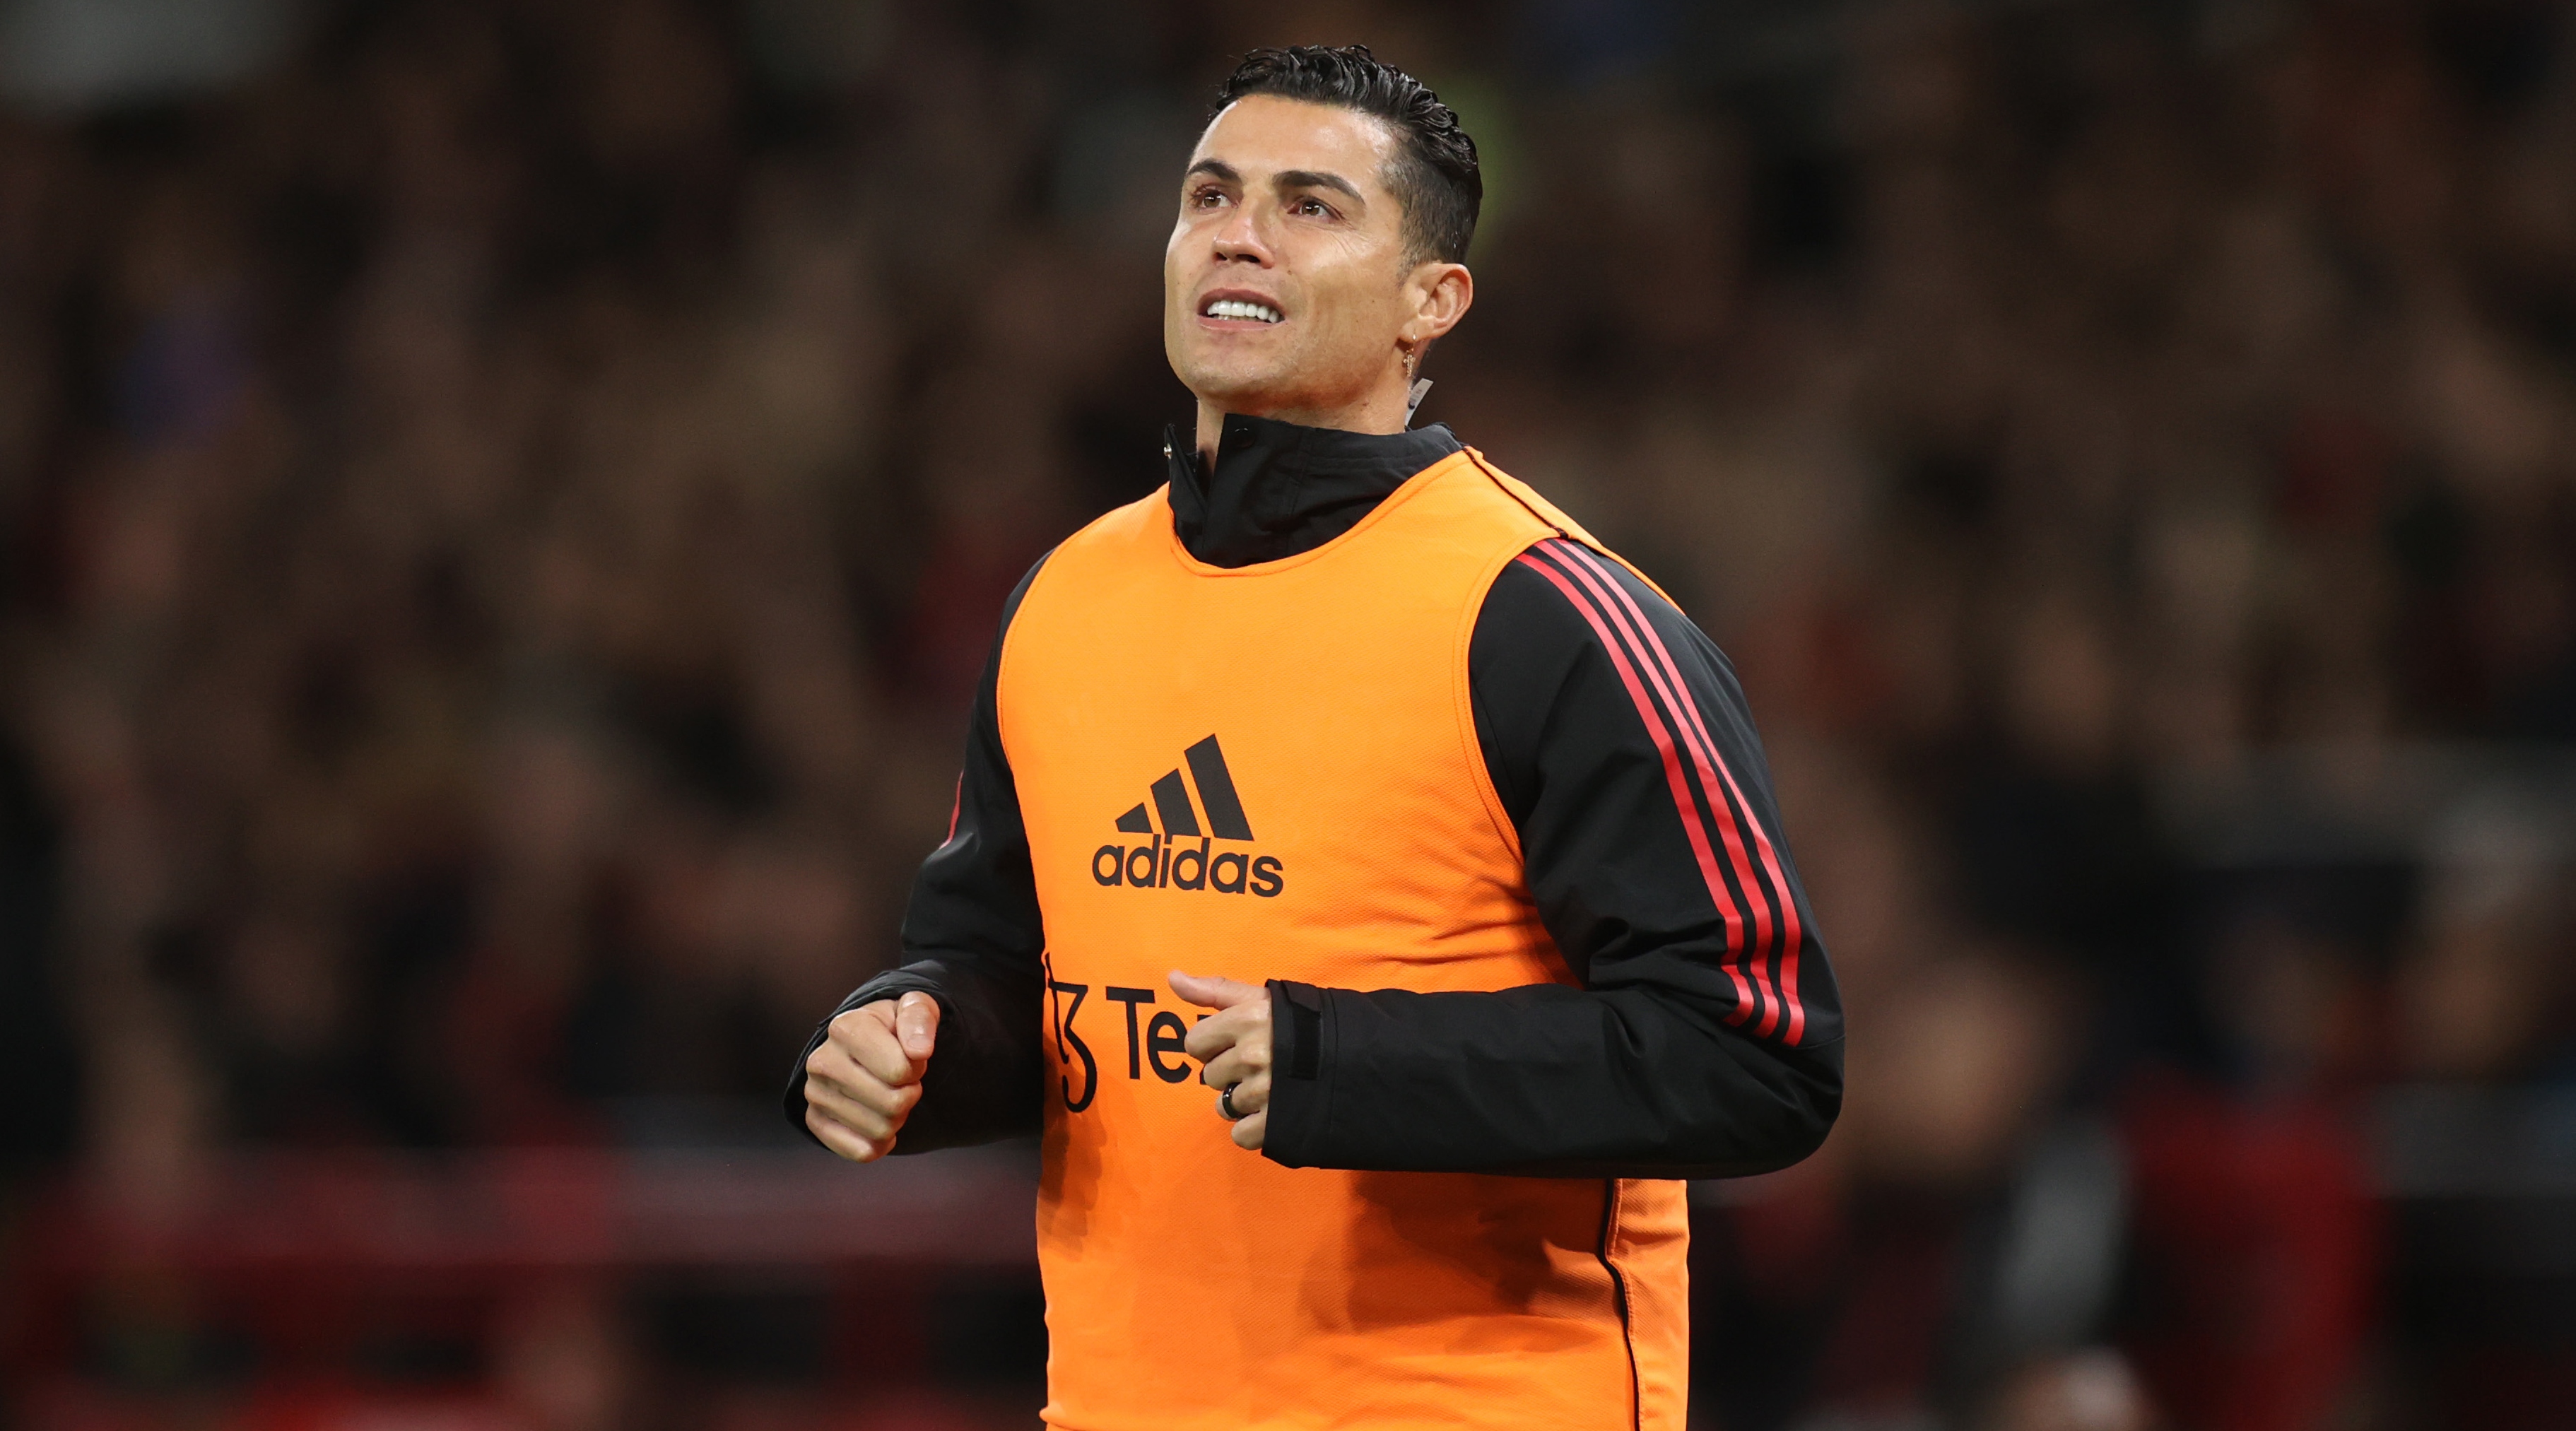 Manchester United striker Cristiano Ronaldo warms up during the Premier League match between Manchester United and Tottenham Hotspur on 19 October, 2022 at Old Trafford, Manchester, United Kingdom